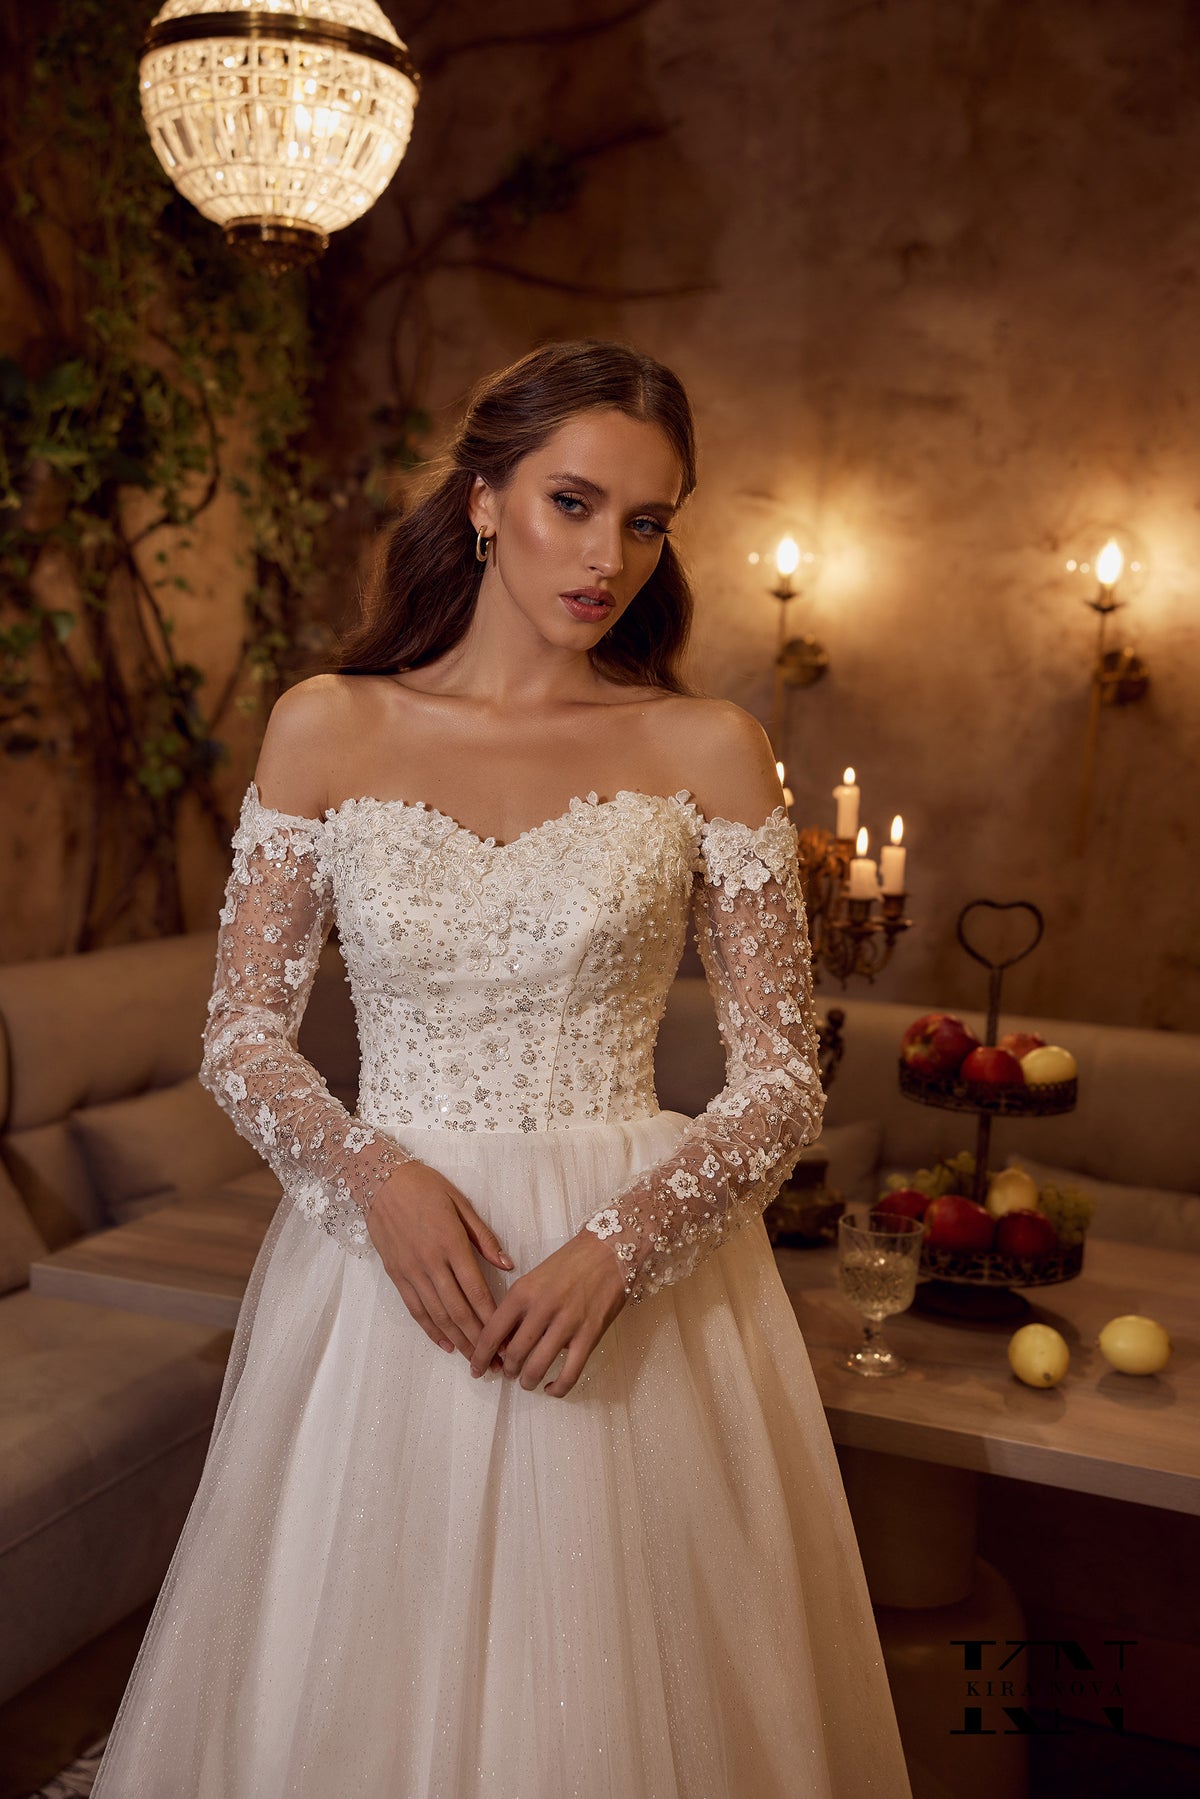 Aline Sparkle Wedding Dress Bridal Gown Sweetheart Neckline Sleeveless Strapless Detachable Off the Shoulder Sleeves Lace Bodice Corset Back